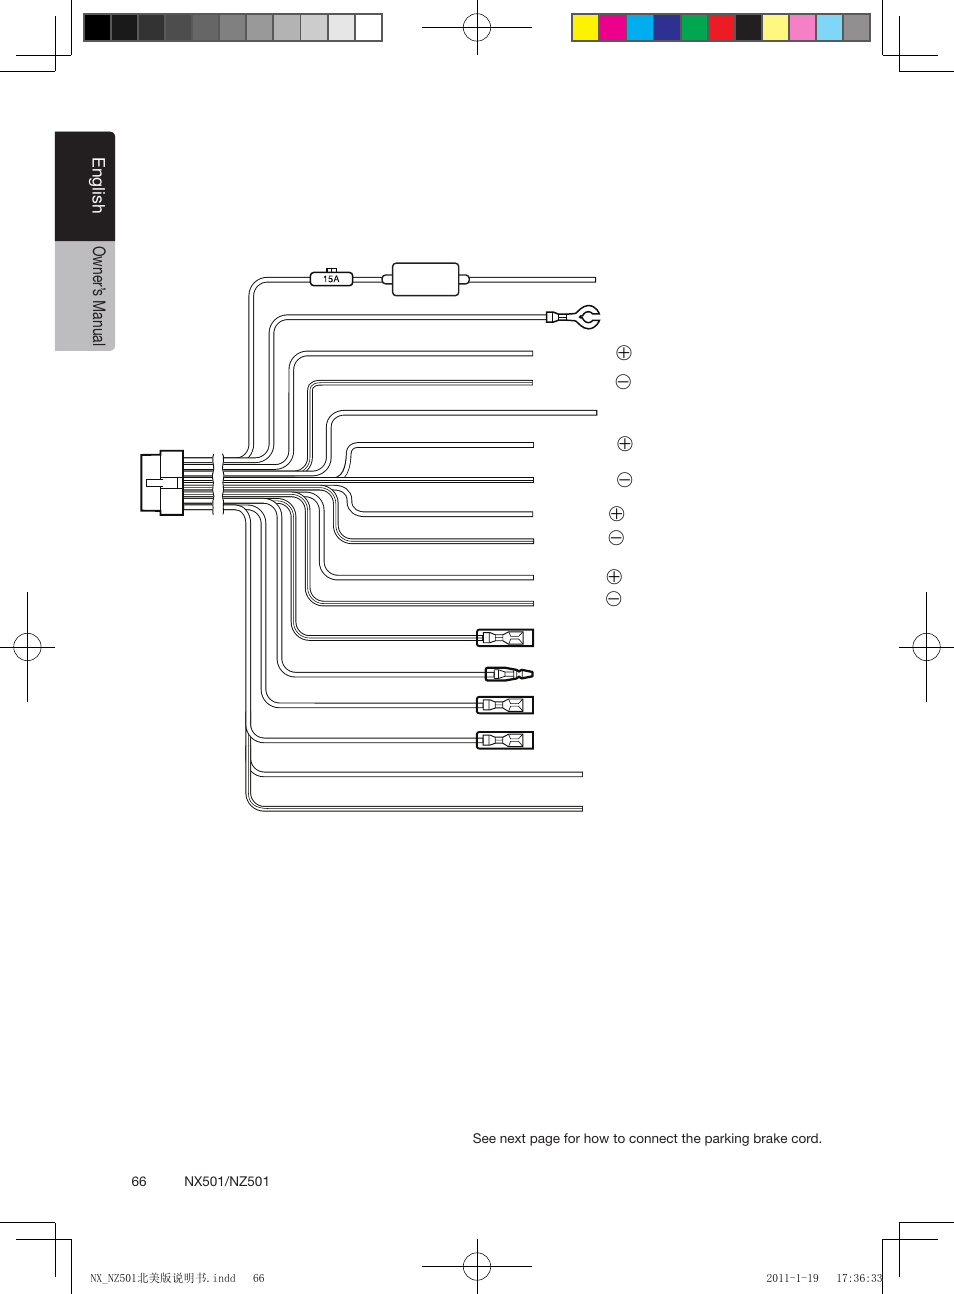 Wiring Diagram For Clarion Nx501